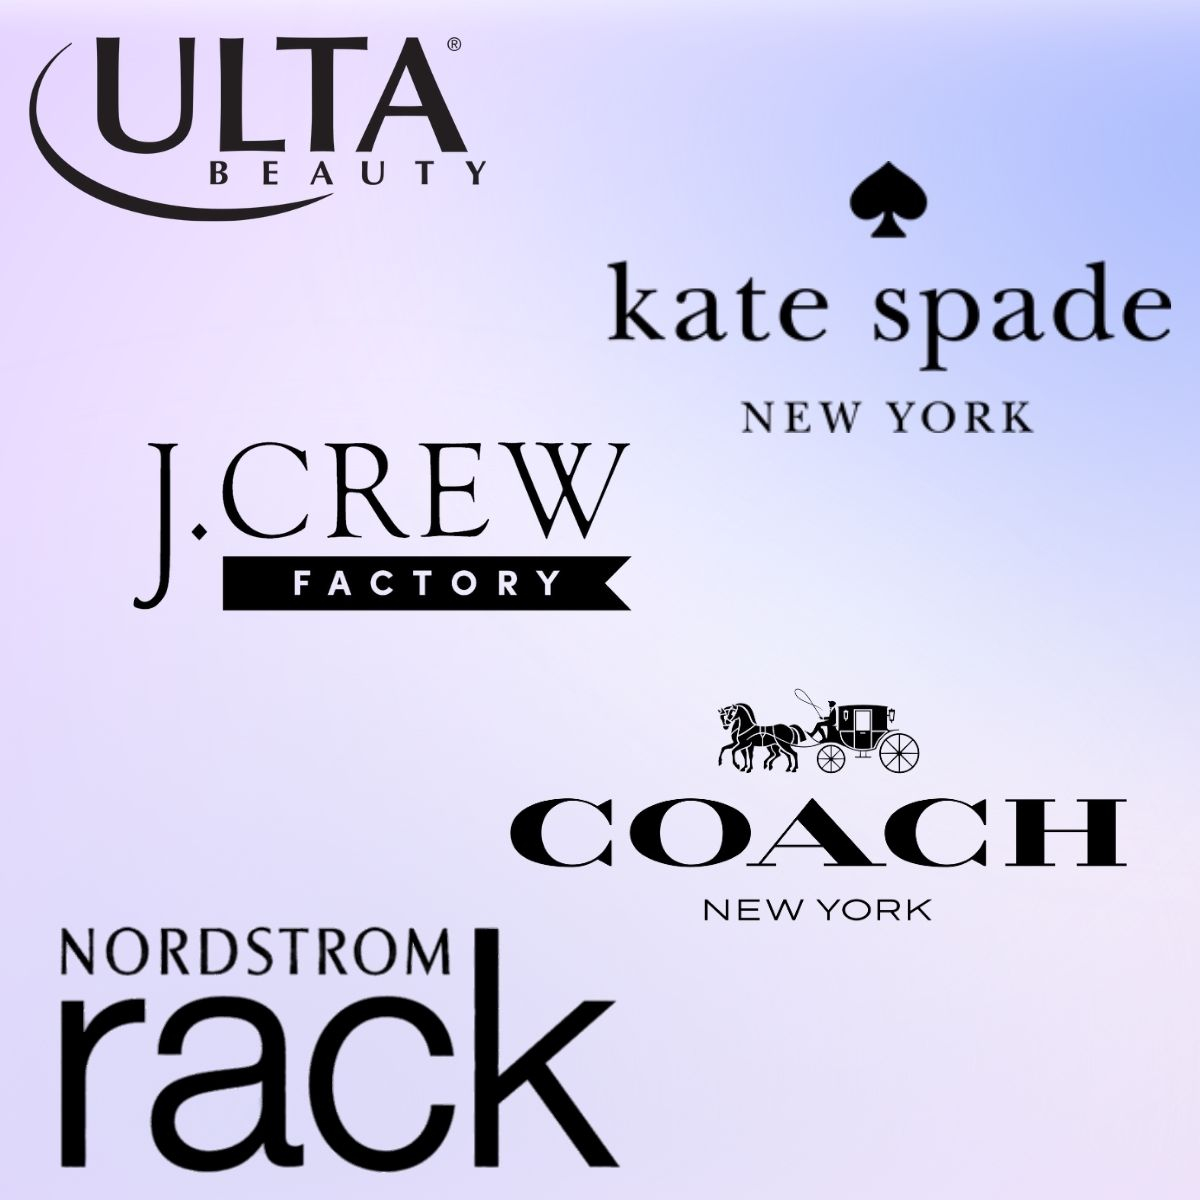 Shop Nordstrom Rack's clearance, up to 84% off